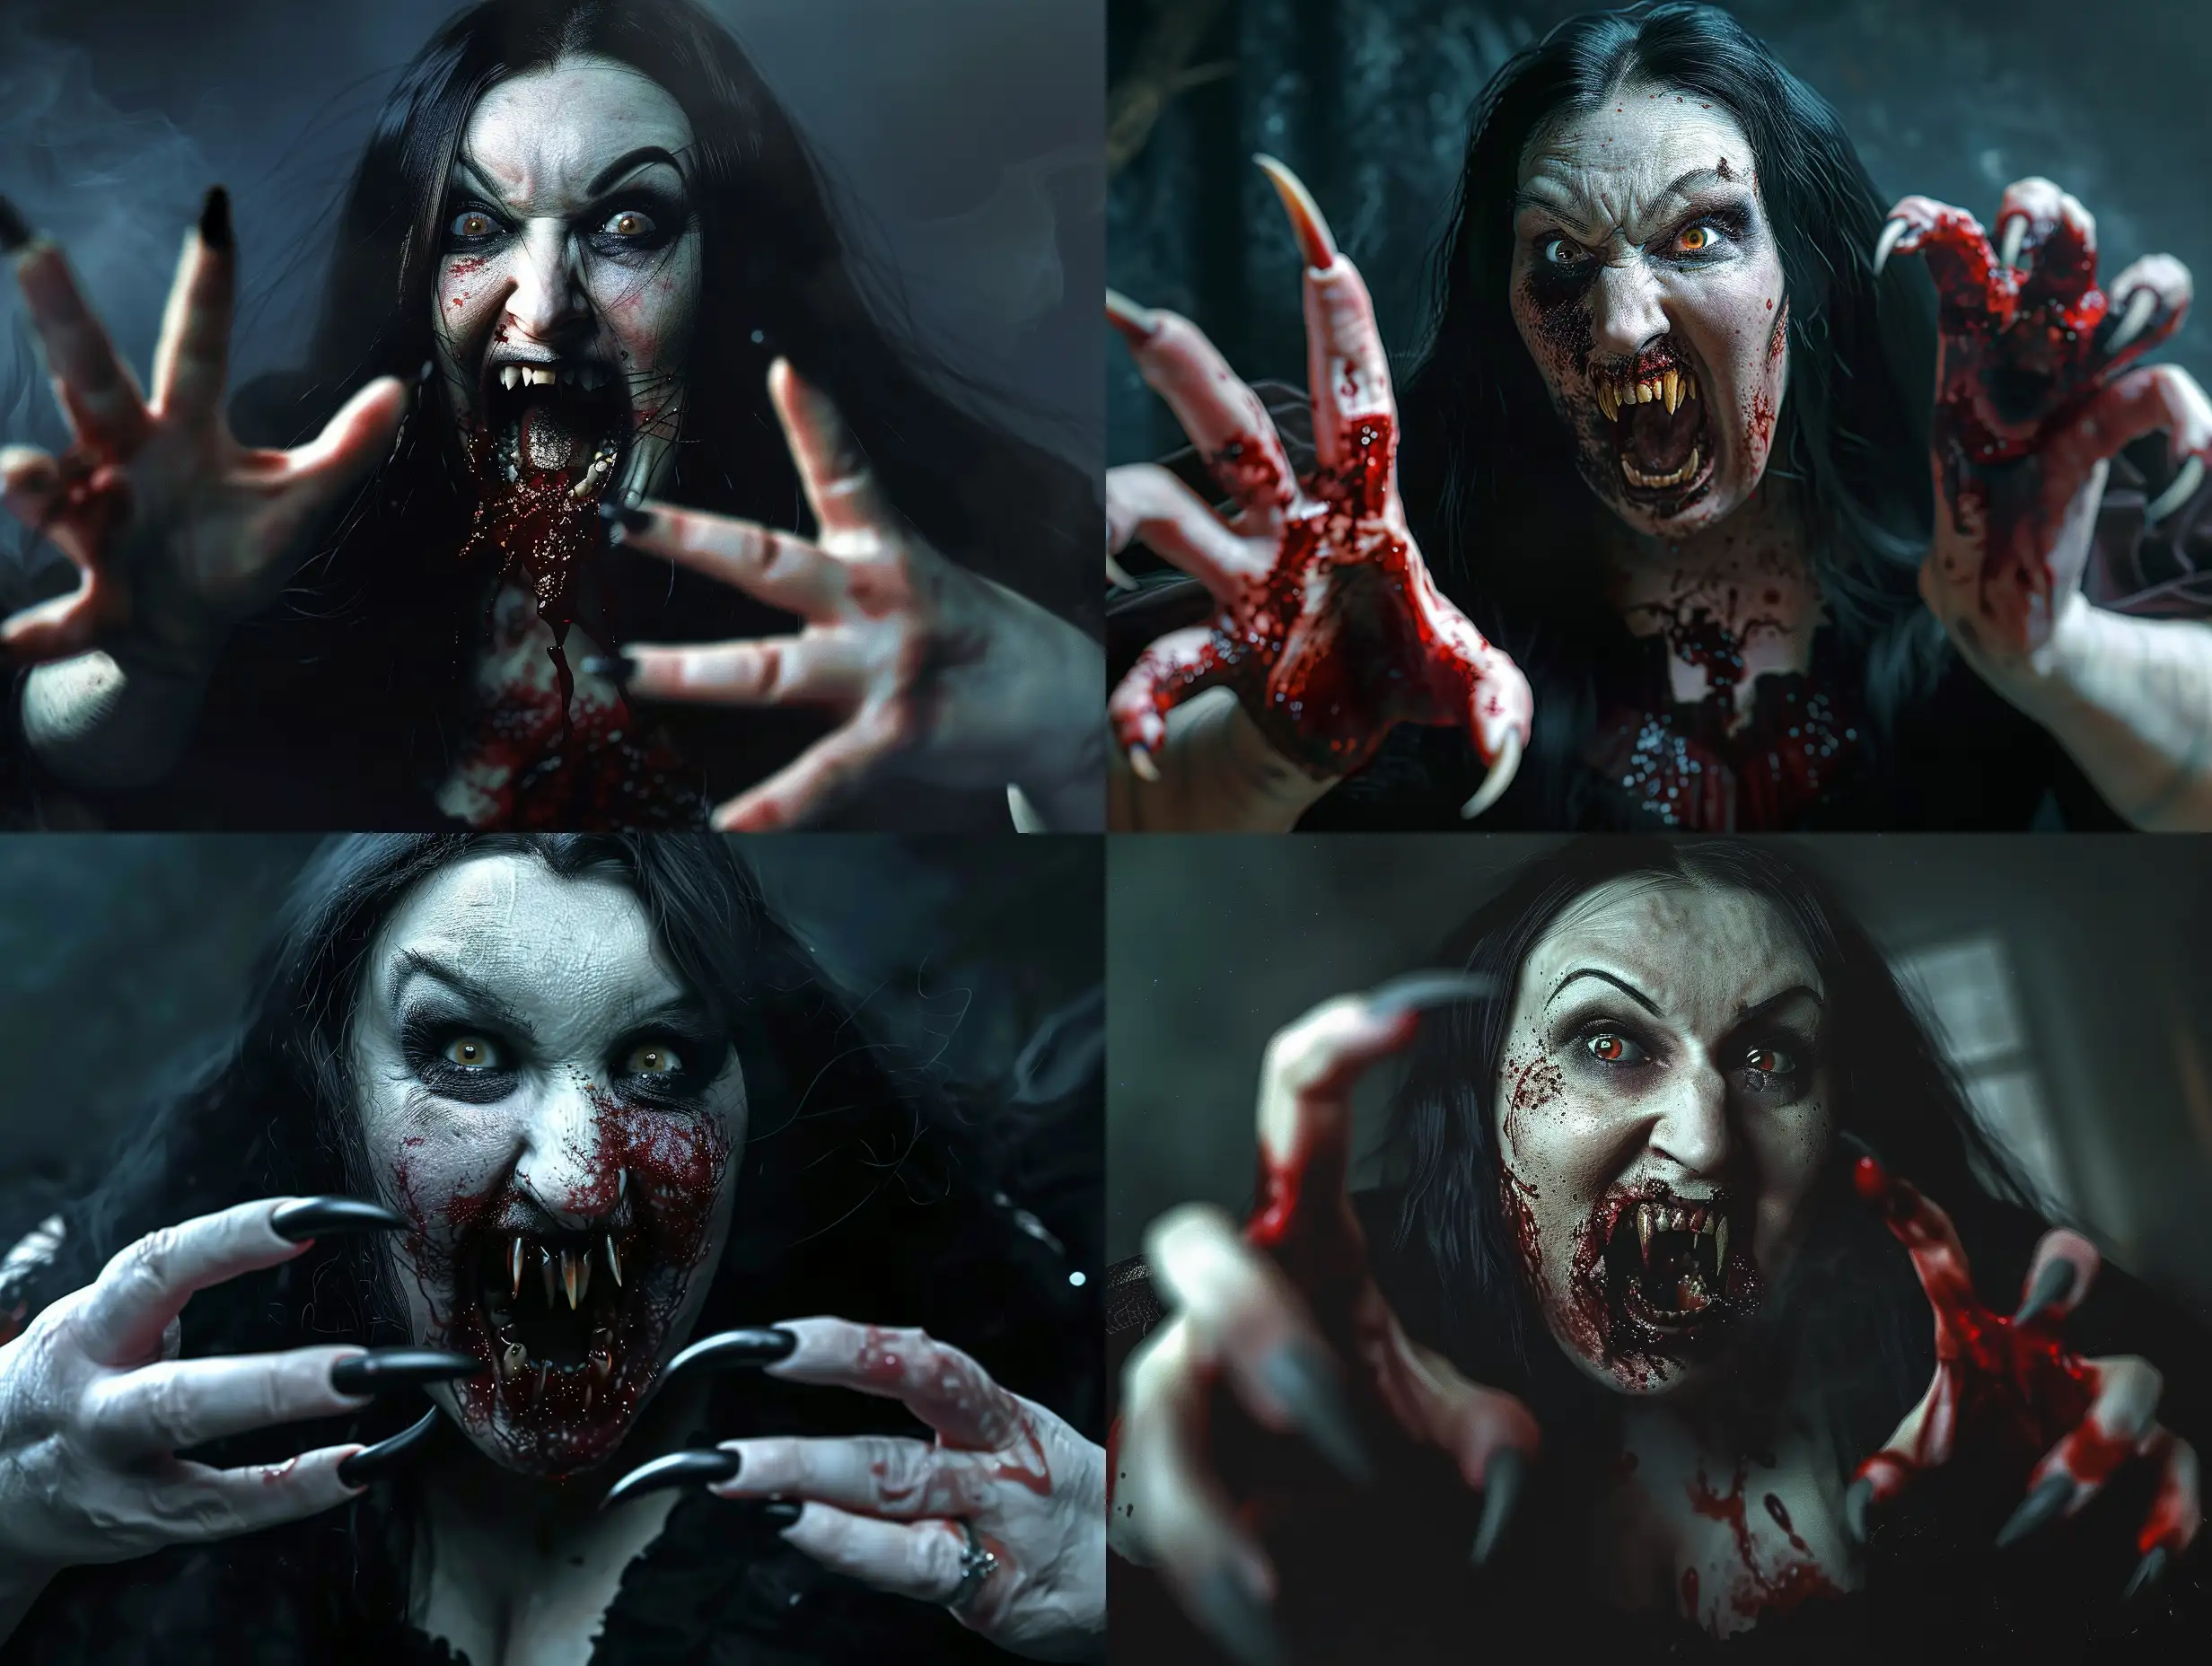 Terrifying-Monstrous-Female-Vampire-with-Predatory-Fangs-and-Curved-Nails-in-Dark-Scene